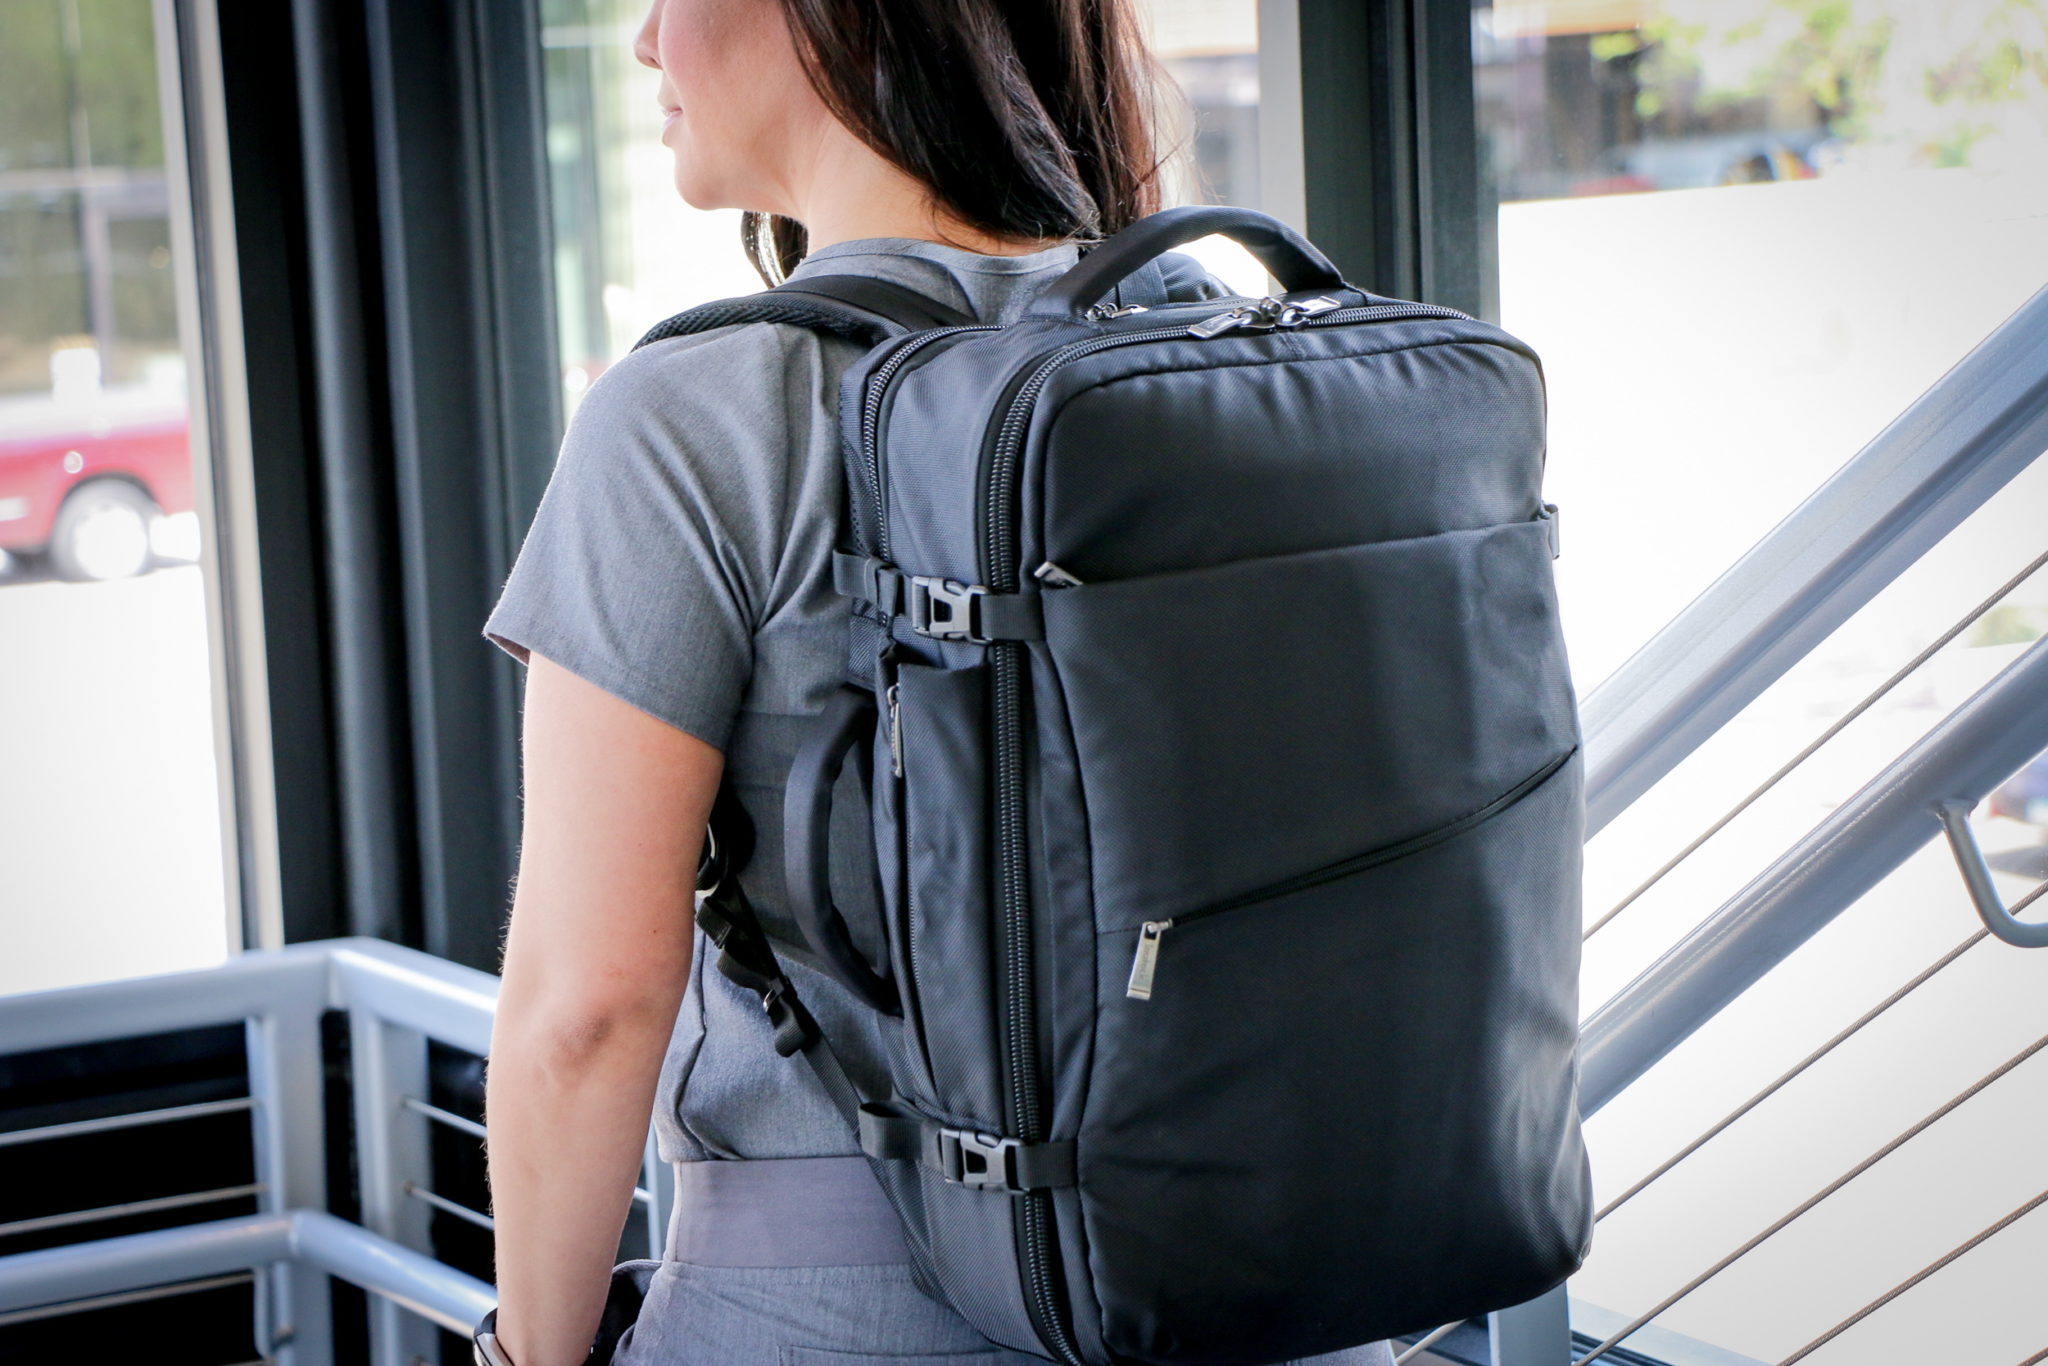 Transportable Exam Backpack for remote or mobile telemedicine